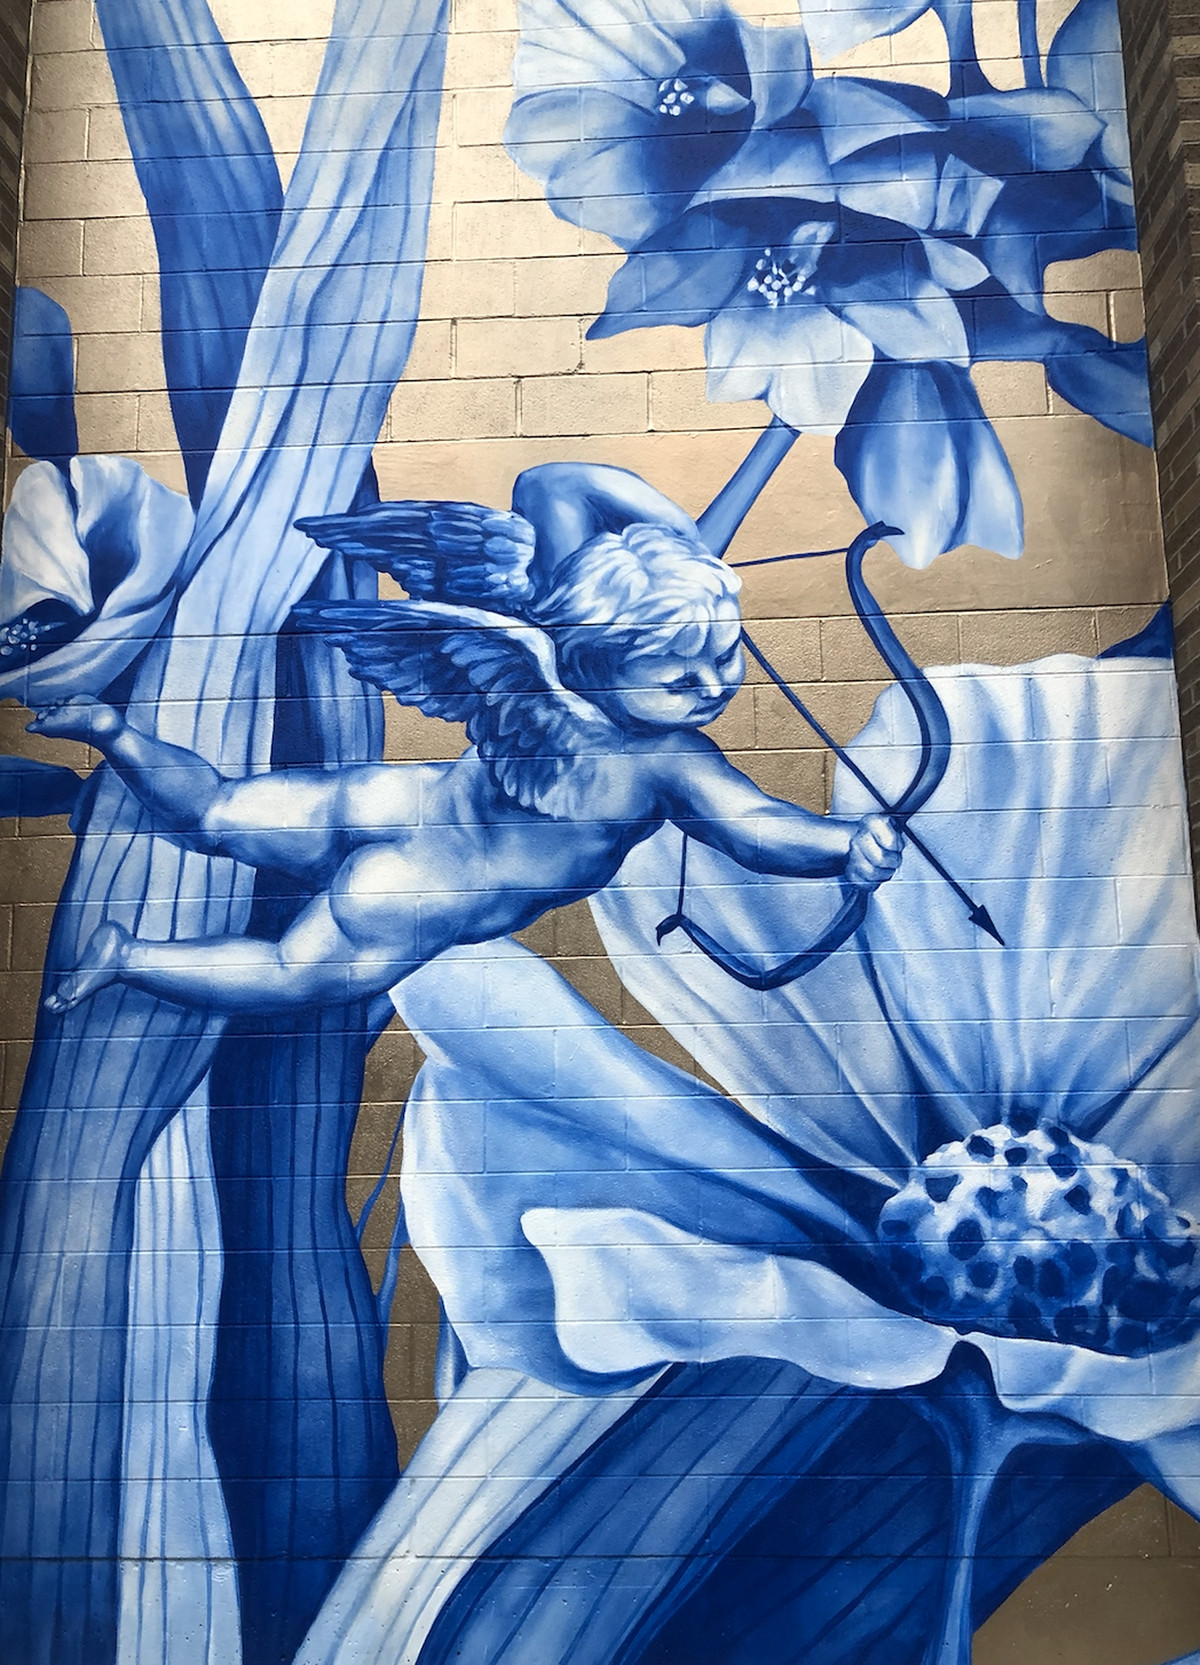 Artist Anna Murphy created the nature-inspired blue-and-white images that give a sense of spirituality to the West Loop mural that features Oprah Winfrey on Green Street between Madison and Monroe.